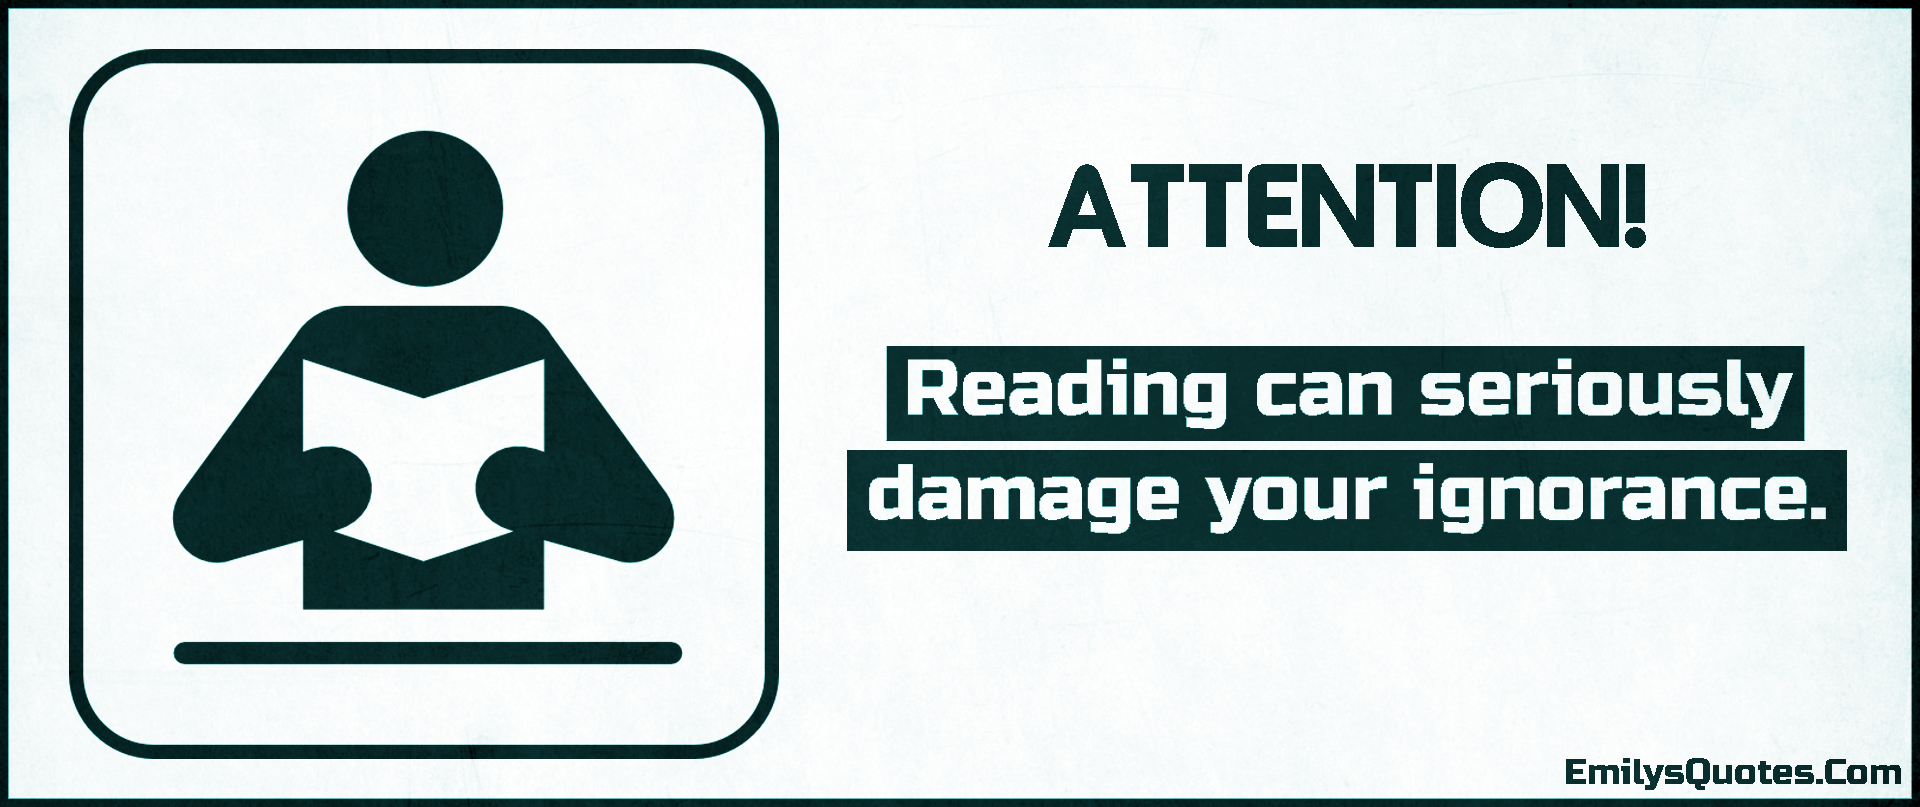 Reading can seriously damage your ignorance